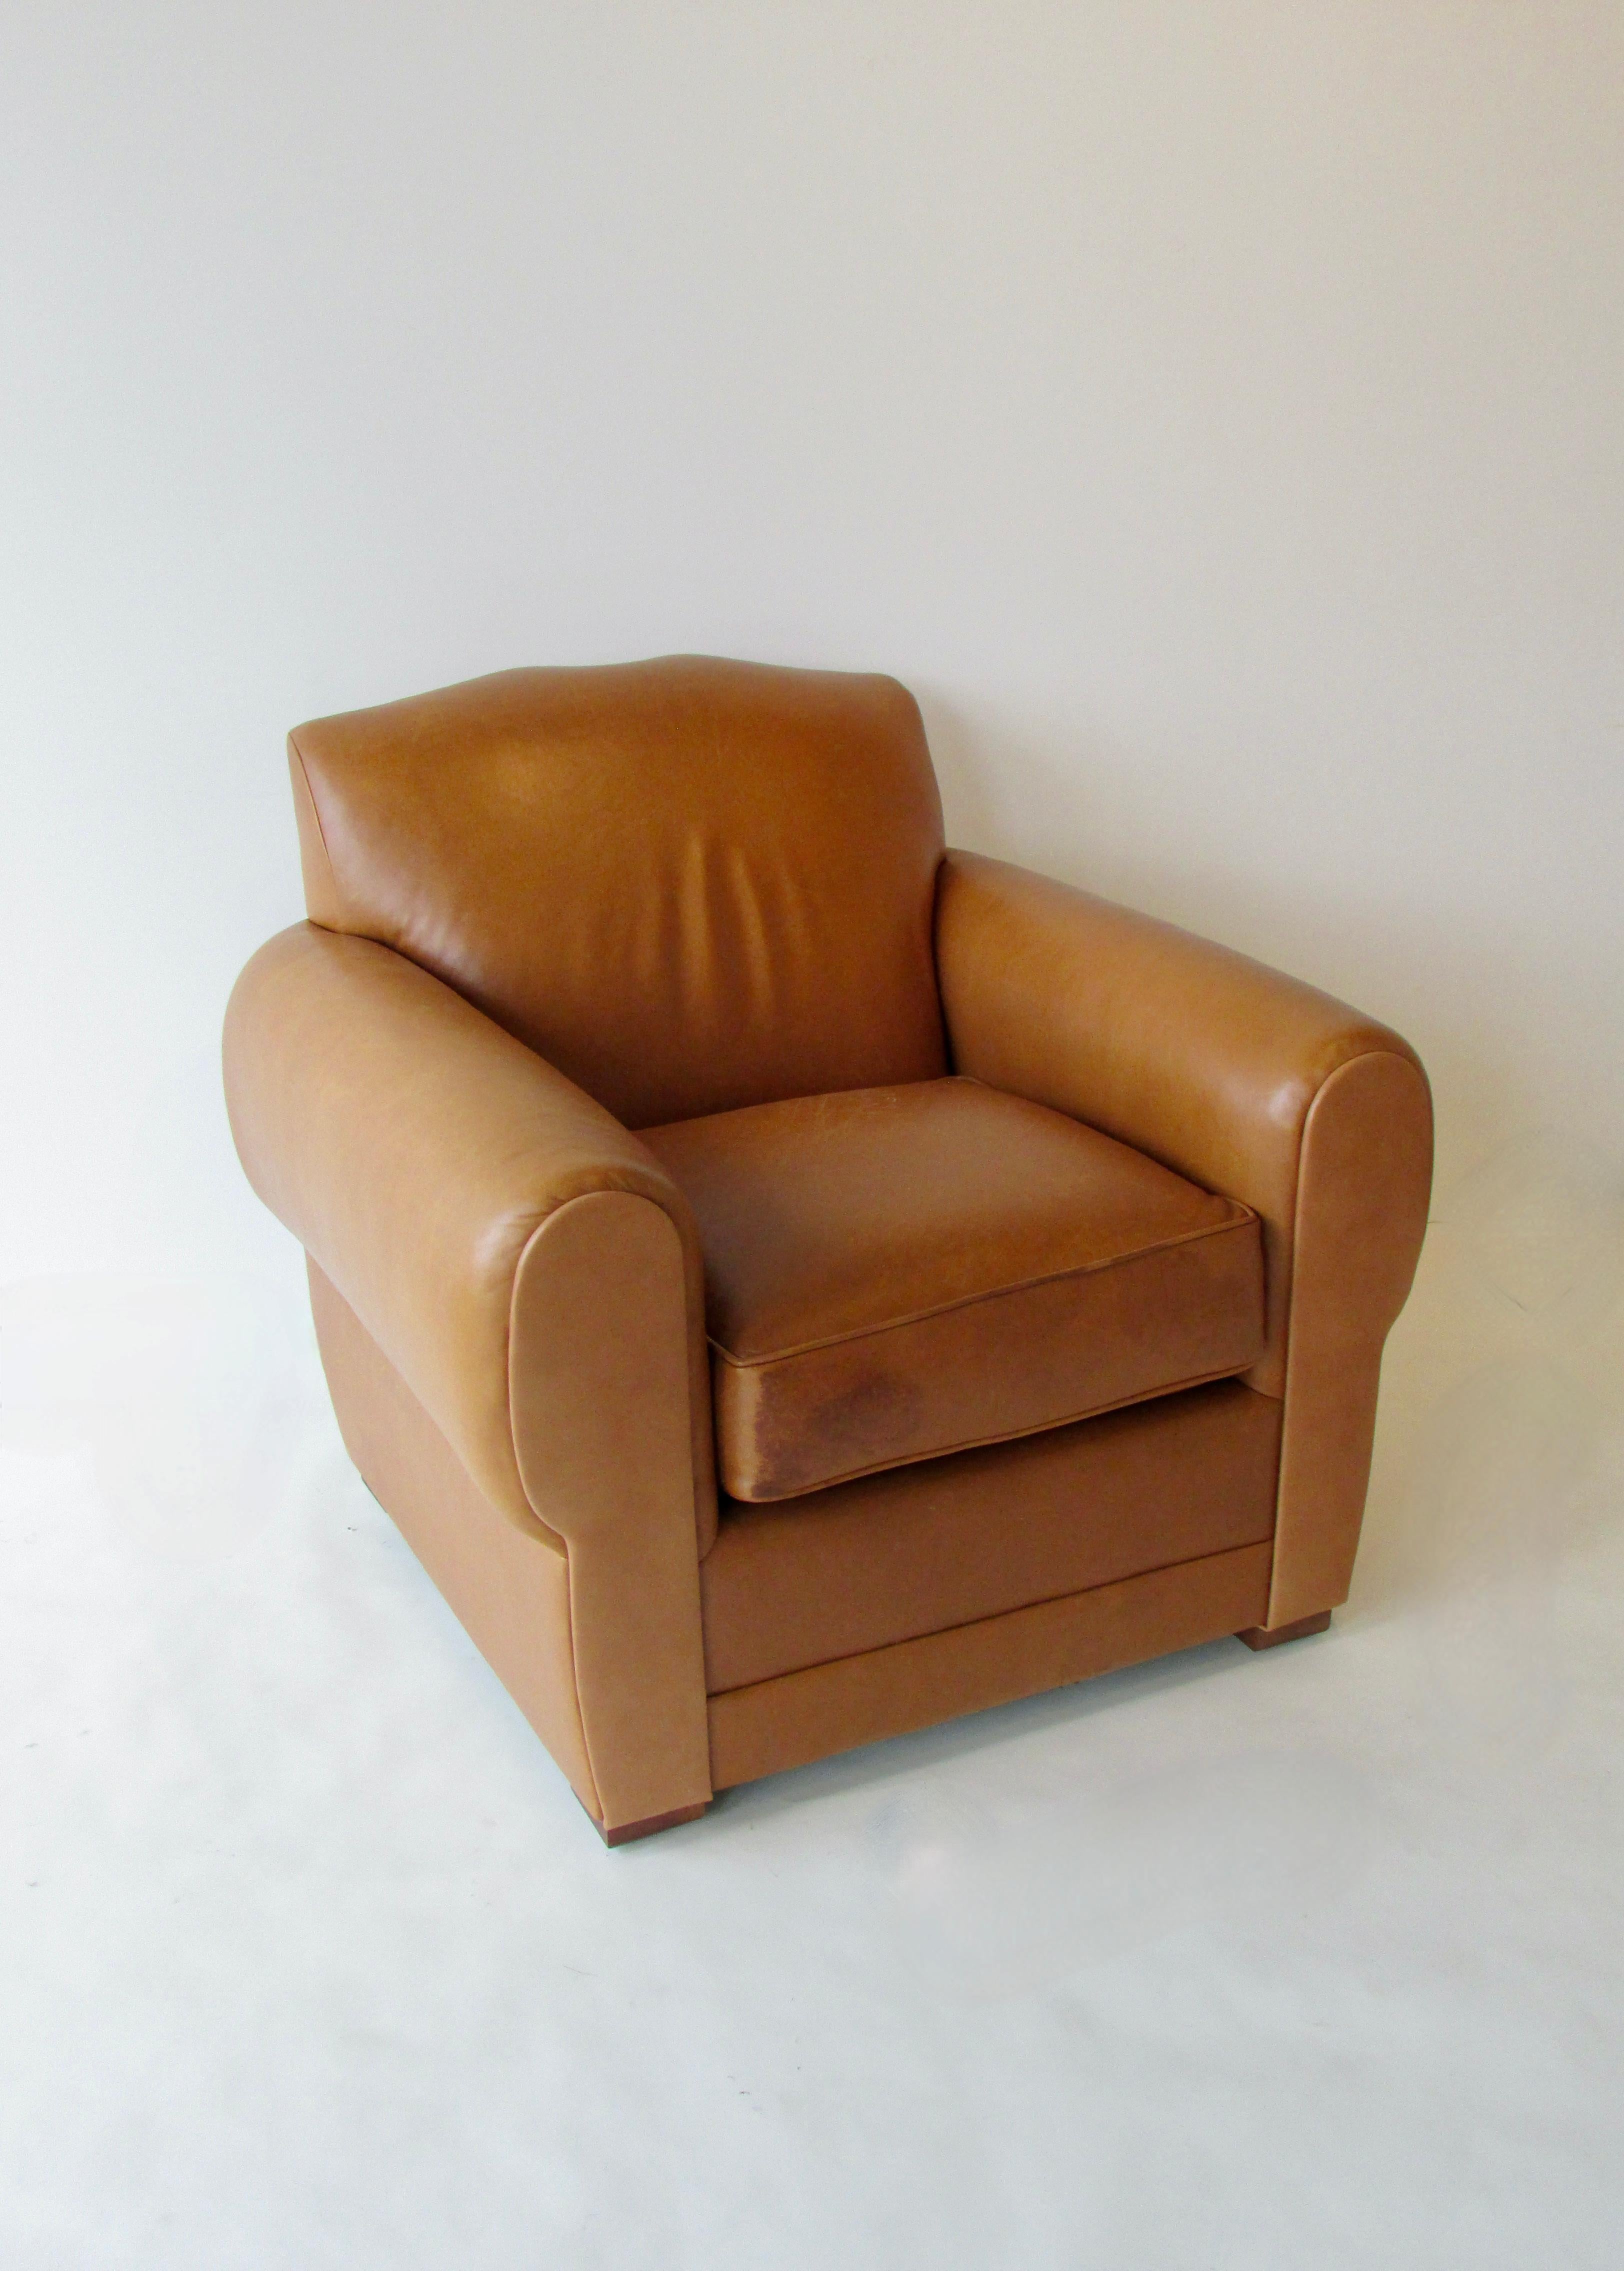 American Ralph Lauren Fench Art Deco Style Leather Club or Lounge Chair for Henredon